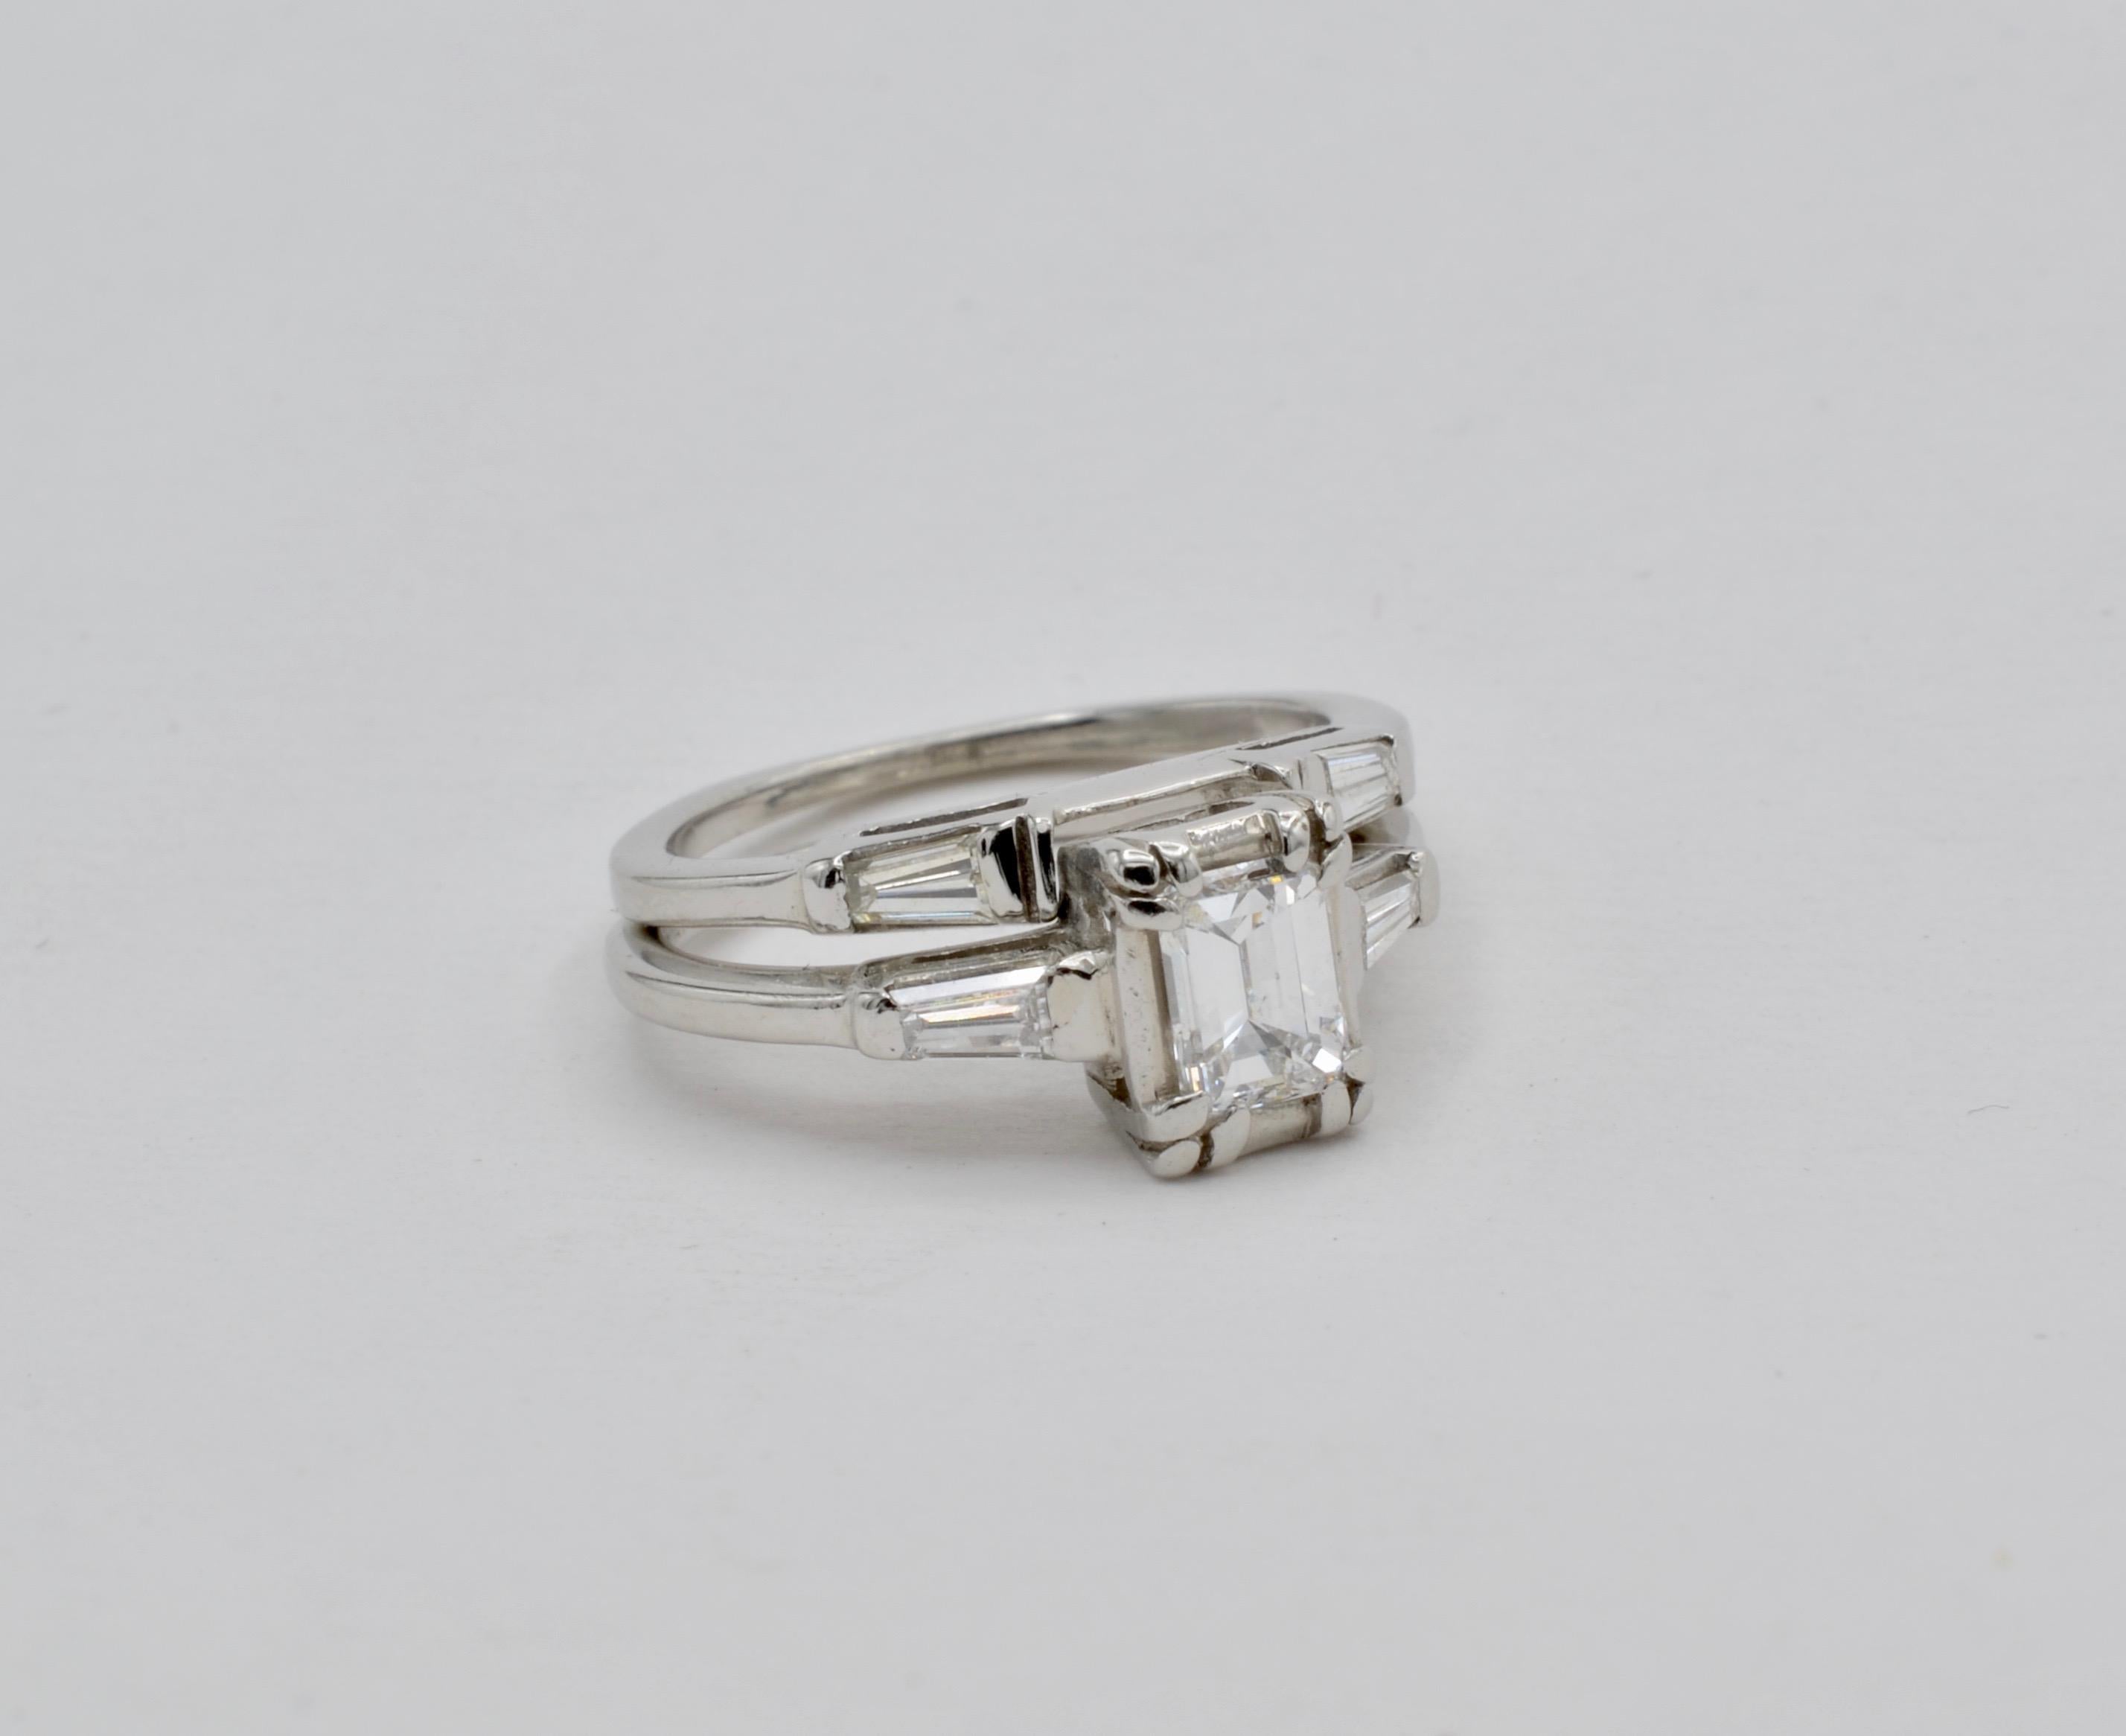 This wedding set is from the 1950's and the style considered Modern for the period. The center diamond is emerald cut .60 ct. The color is D which is colorless. The quality is SI1. There are two diamond baguette on either side of this magnificent